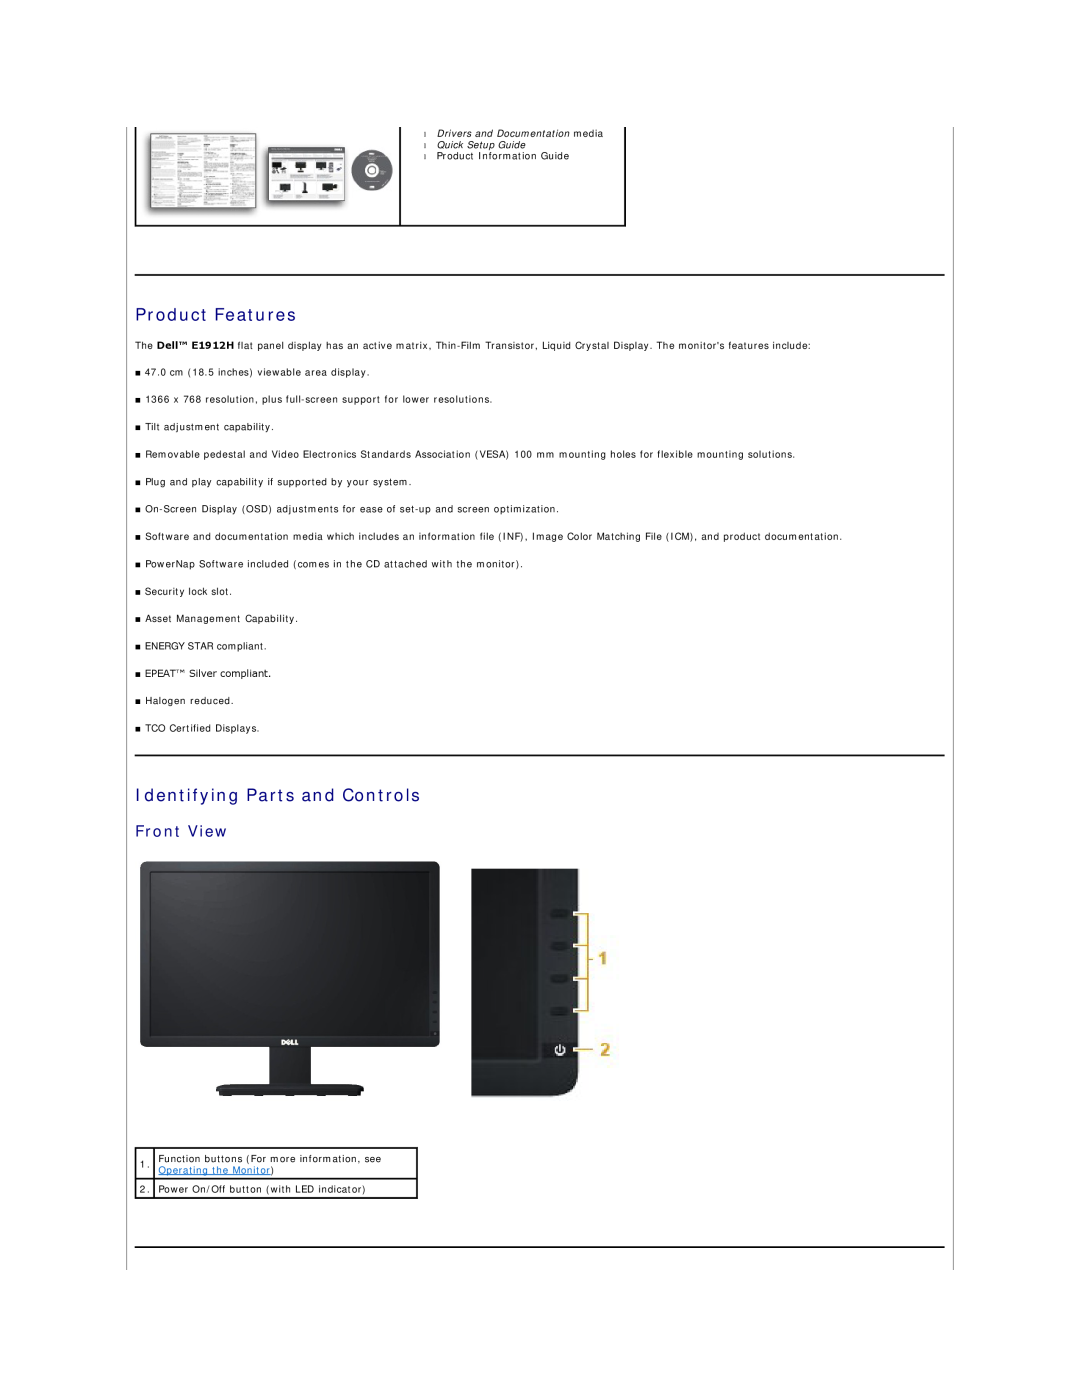 Dell 4690698 appendix Product Features, Identifying Parts and Controls, Front View 